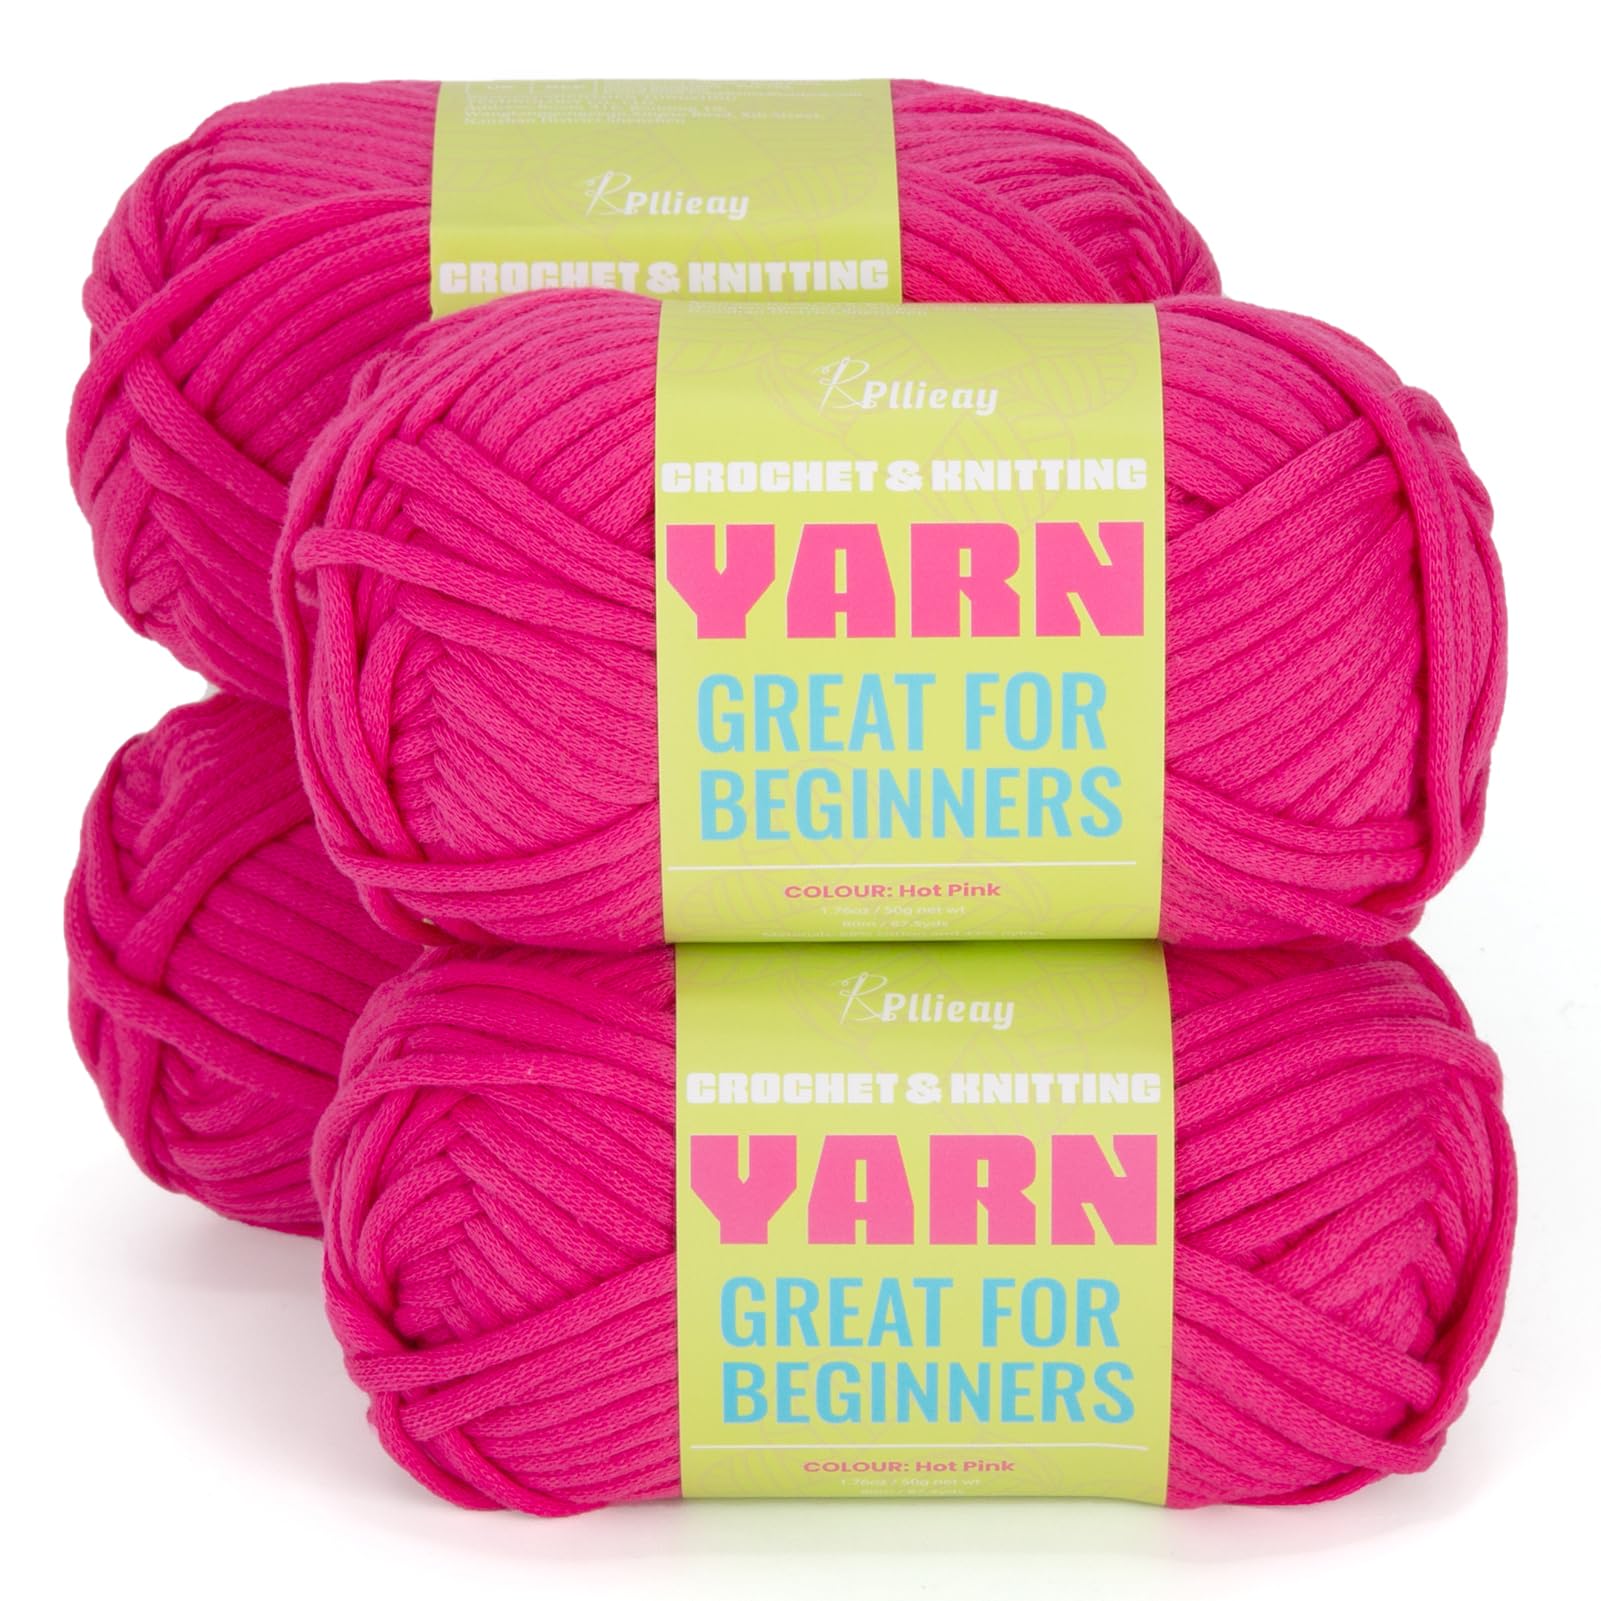  Pllieay Sage Yarn for Crocheting and Knitting (4x50g) Cotton  Yarn for Crocheting Crochet Knitting Yarn with Easy-to-See Stitches Yarn  for Beginners - Worsted Medium #4 Yarn - Cotton-Nylon Blend